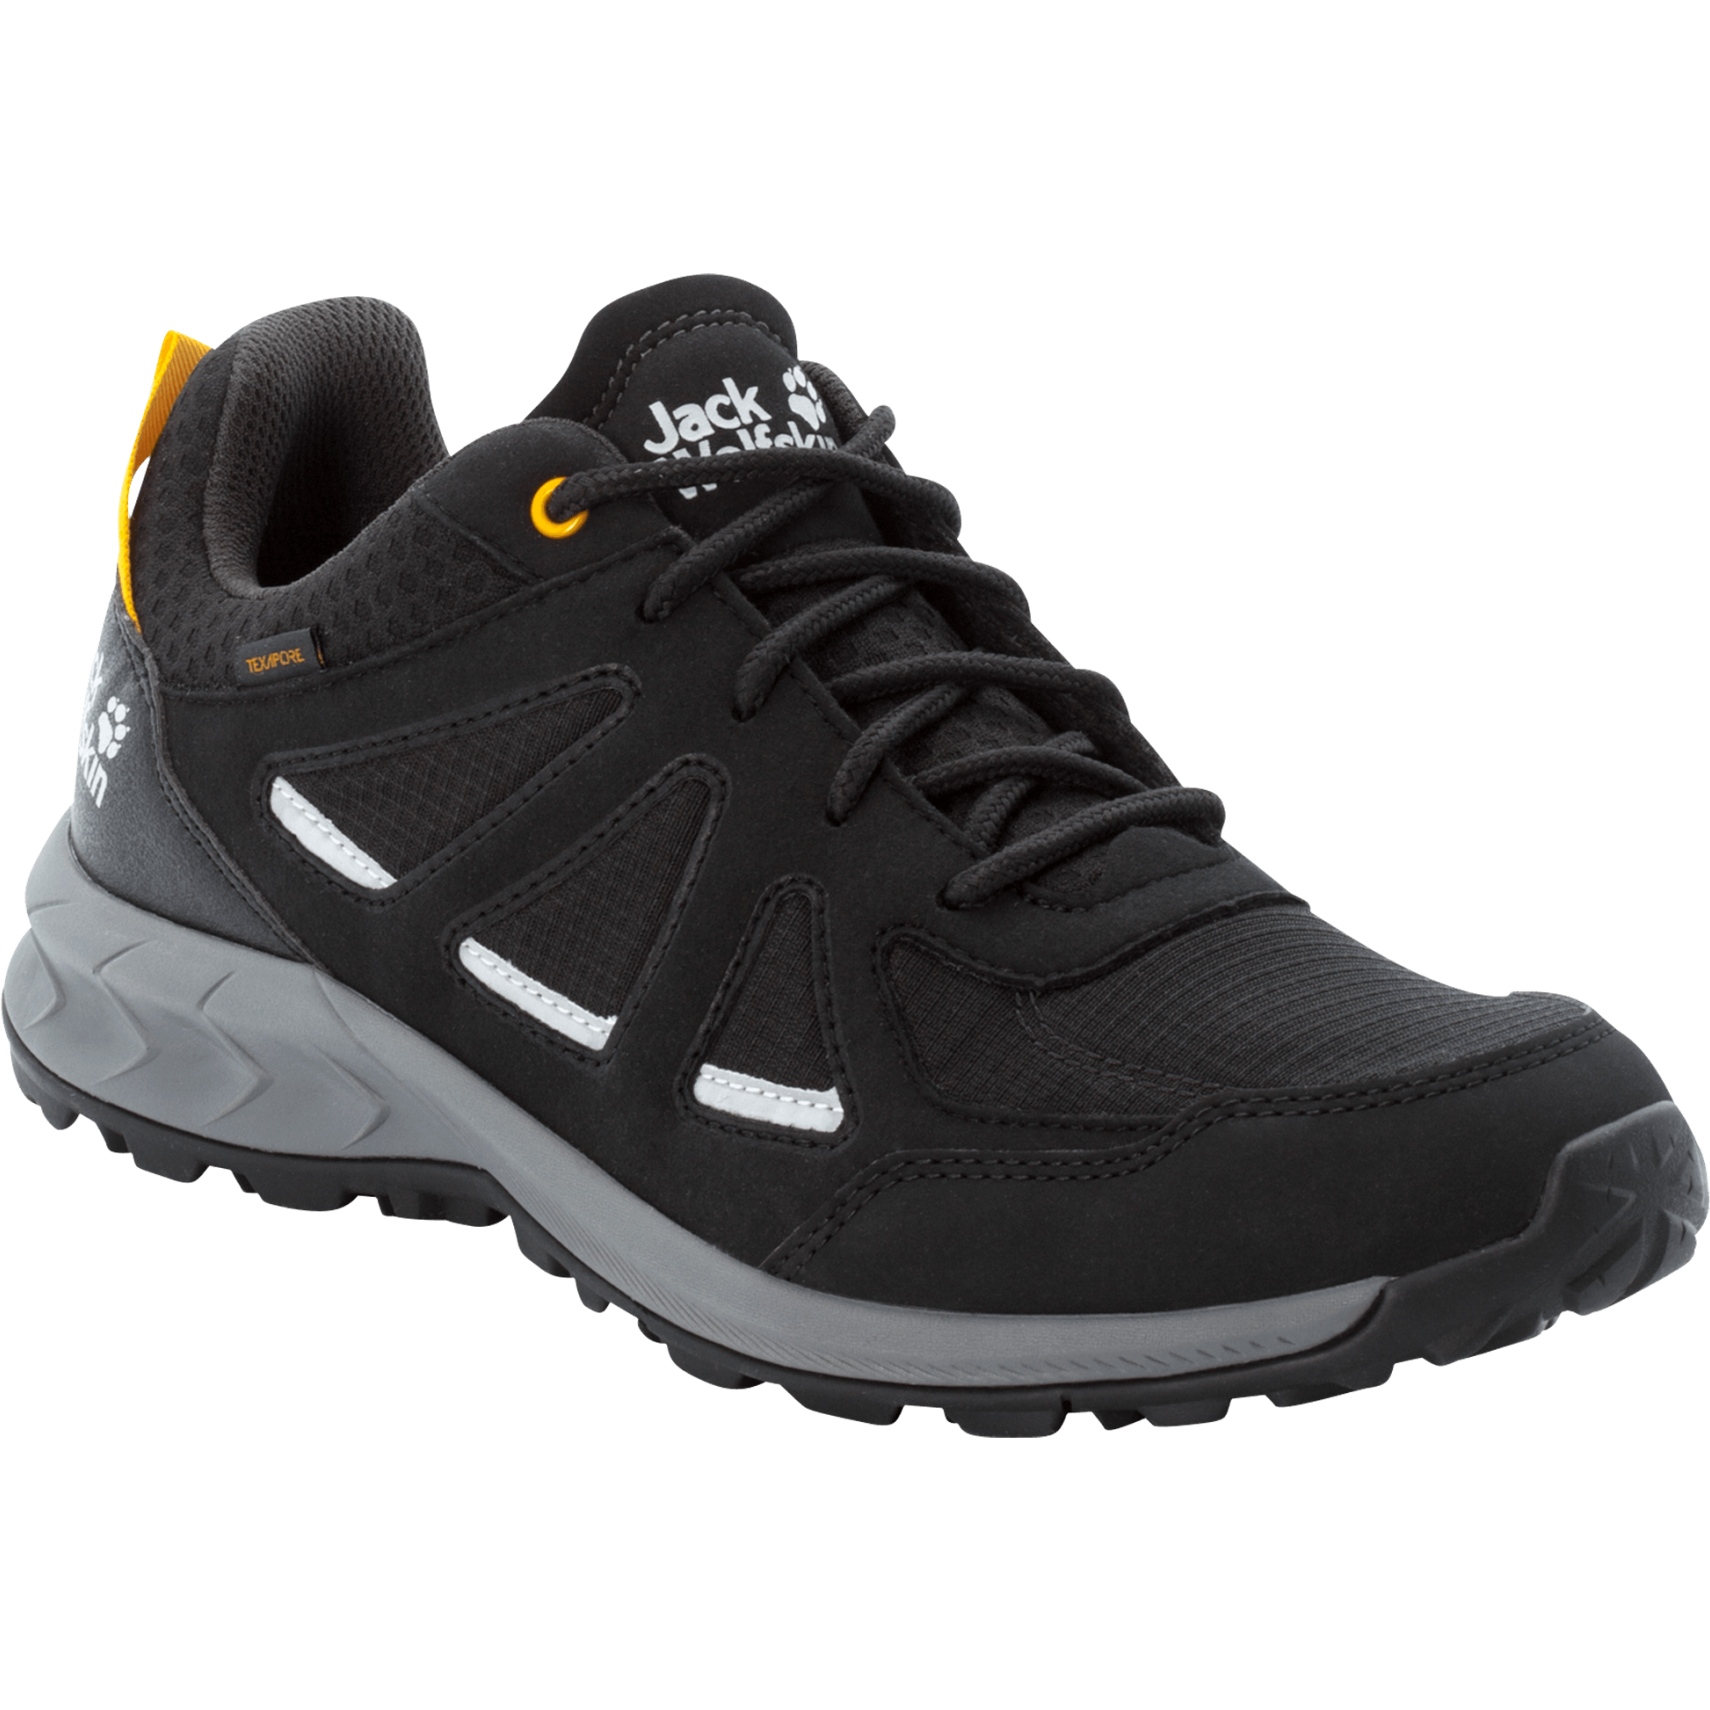 Picture of Jack Wolfskin Woodland 2 Texapore Low Hiking Shoes Men - black / burly yellow XT